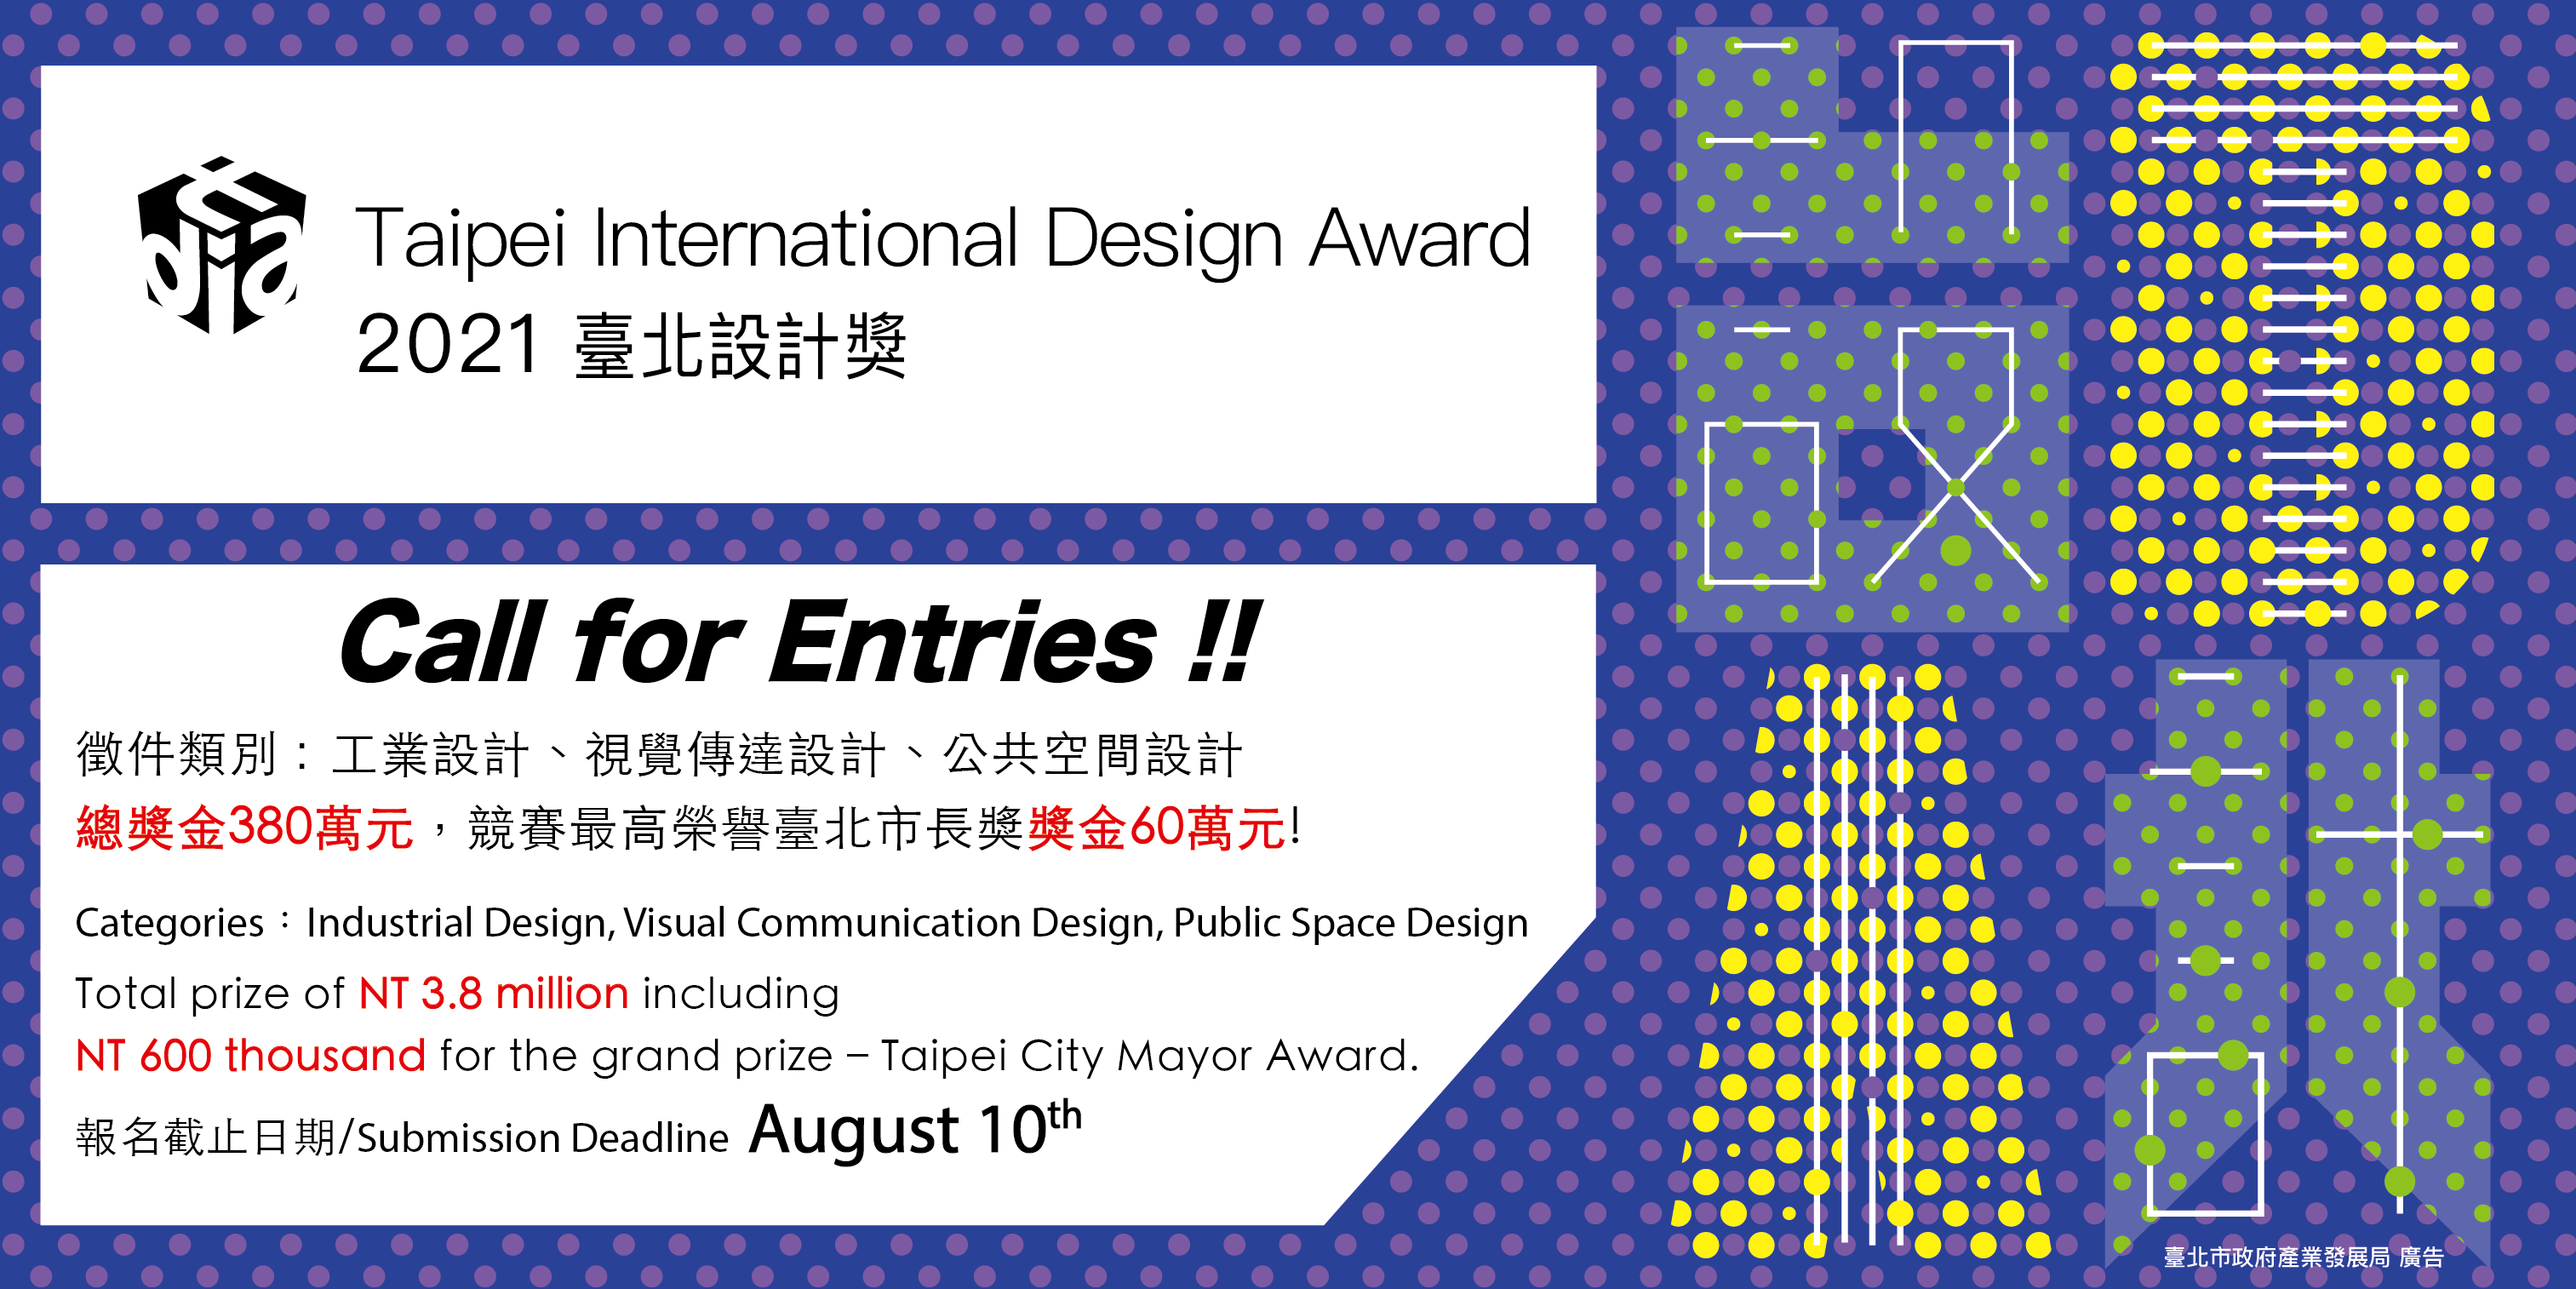 Taipei International Design Award 2021 for Outstanding Designers (Up to NT$3,800,000 in prizes)